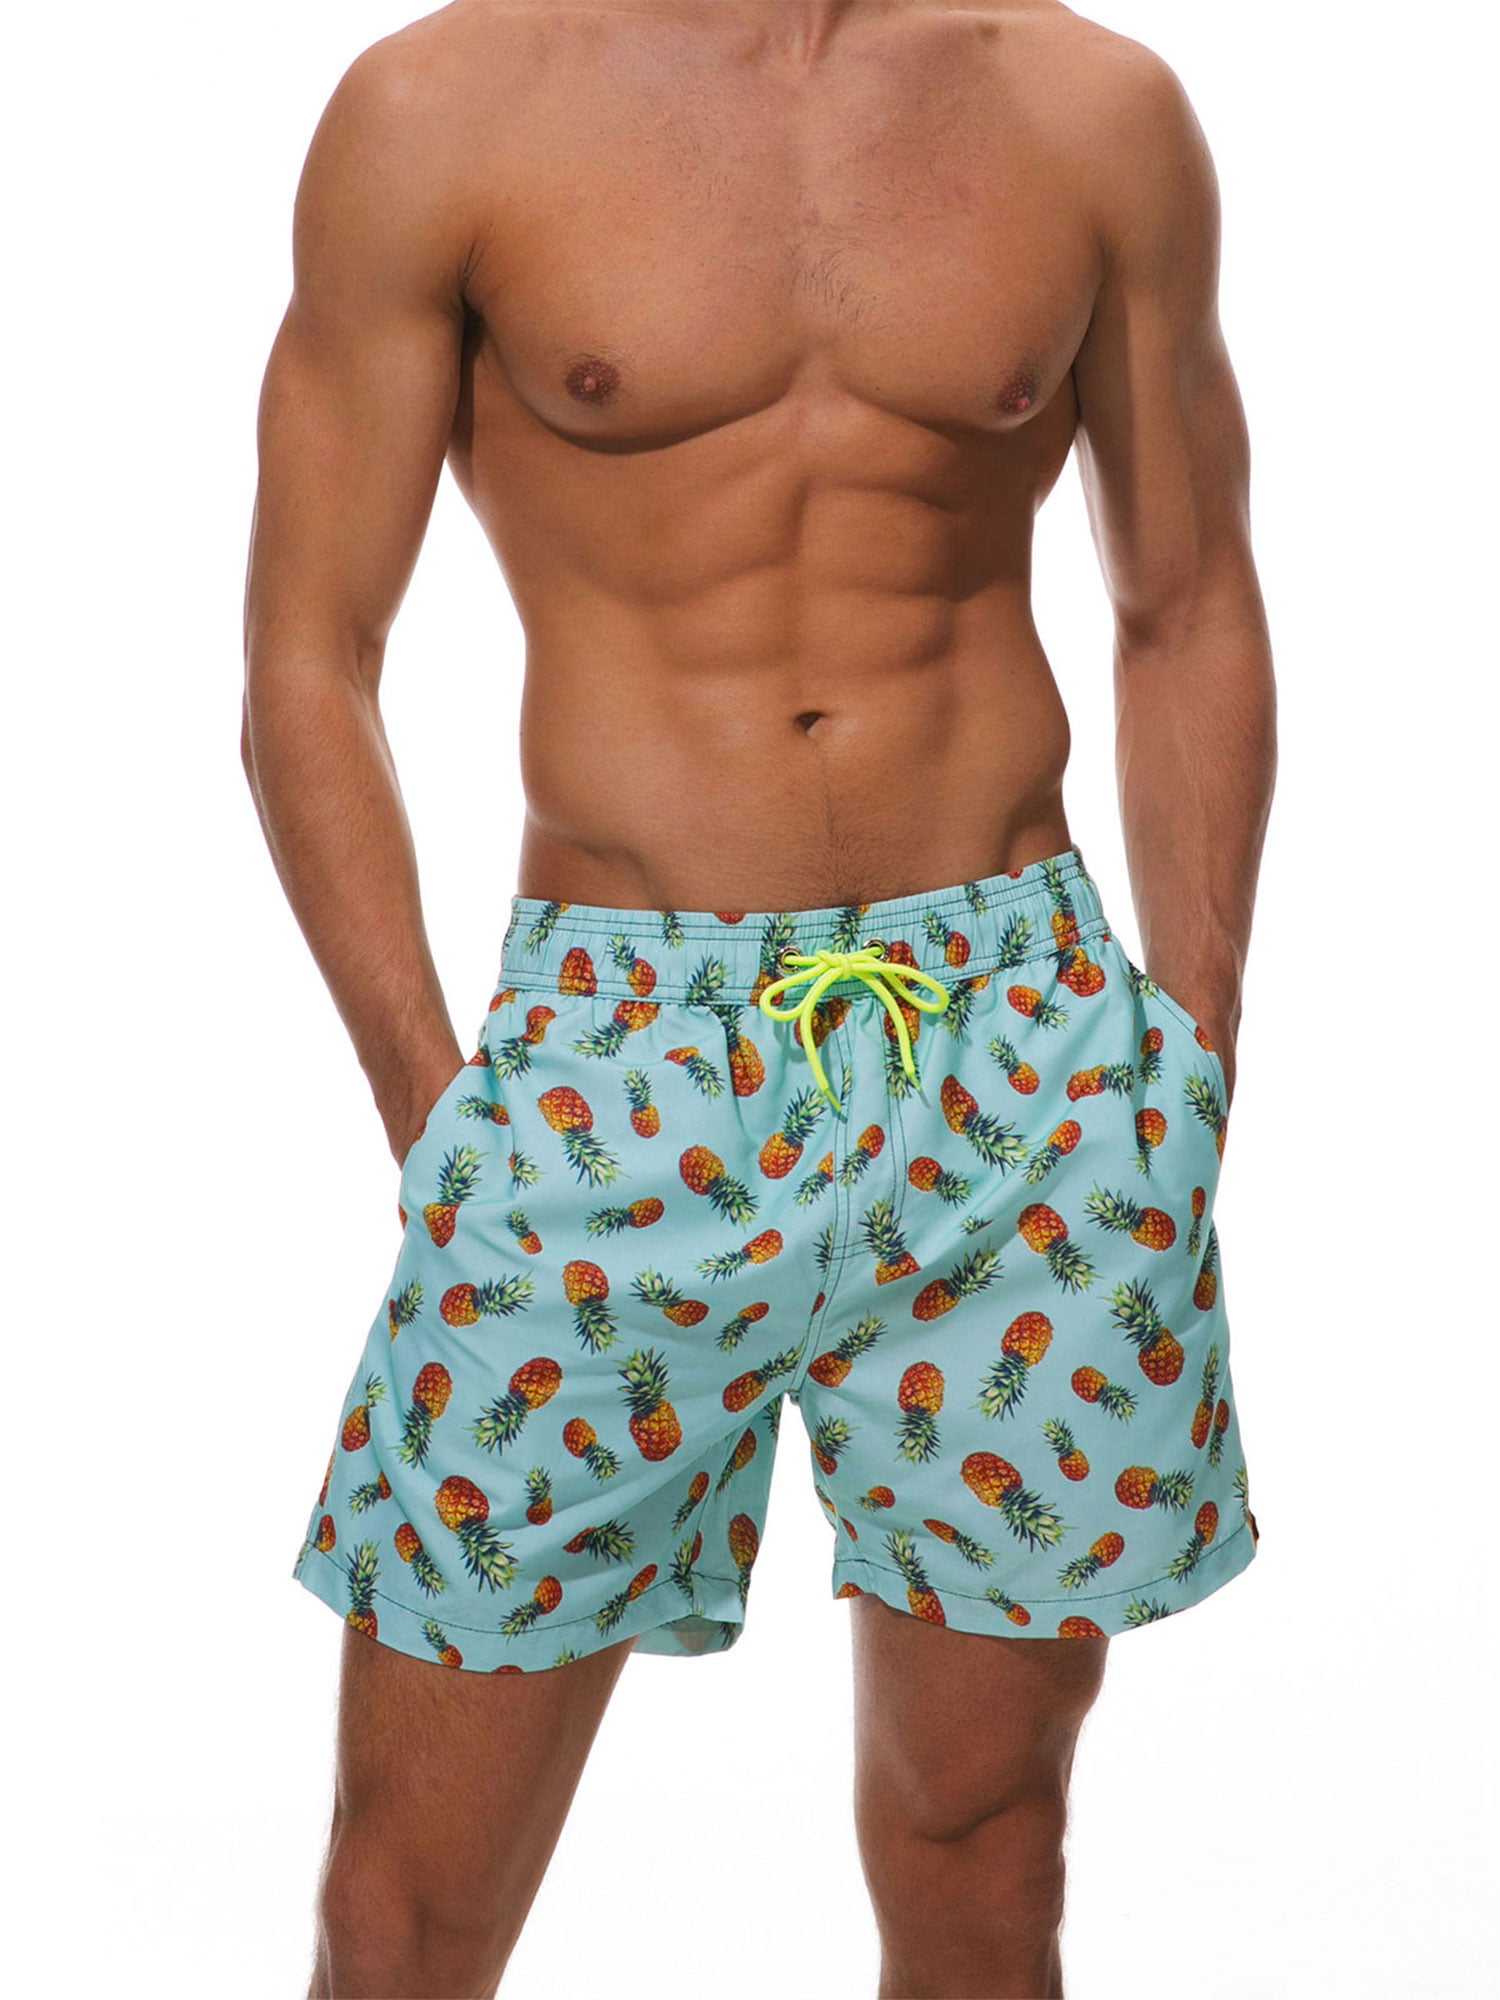 I·D Good Figure Men's Swim Trunks Beach Shorts Pants Quick Dry with Mesh Lining and Pockets 